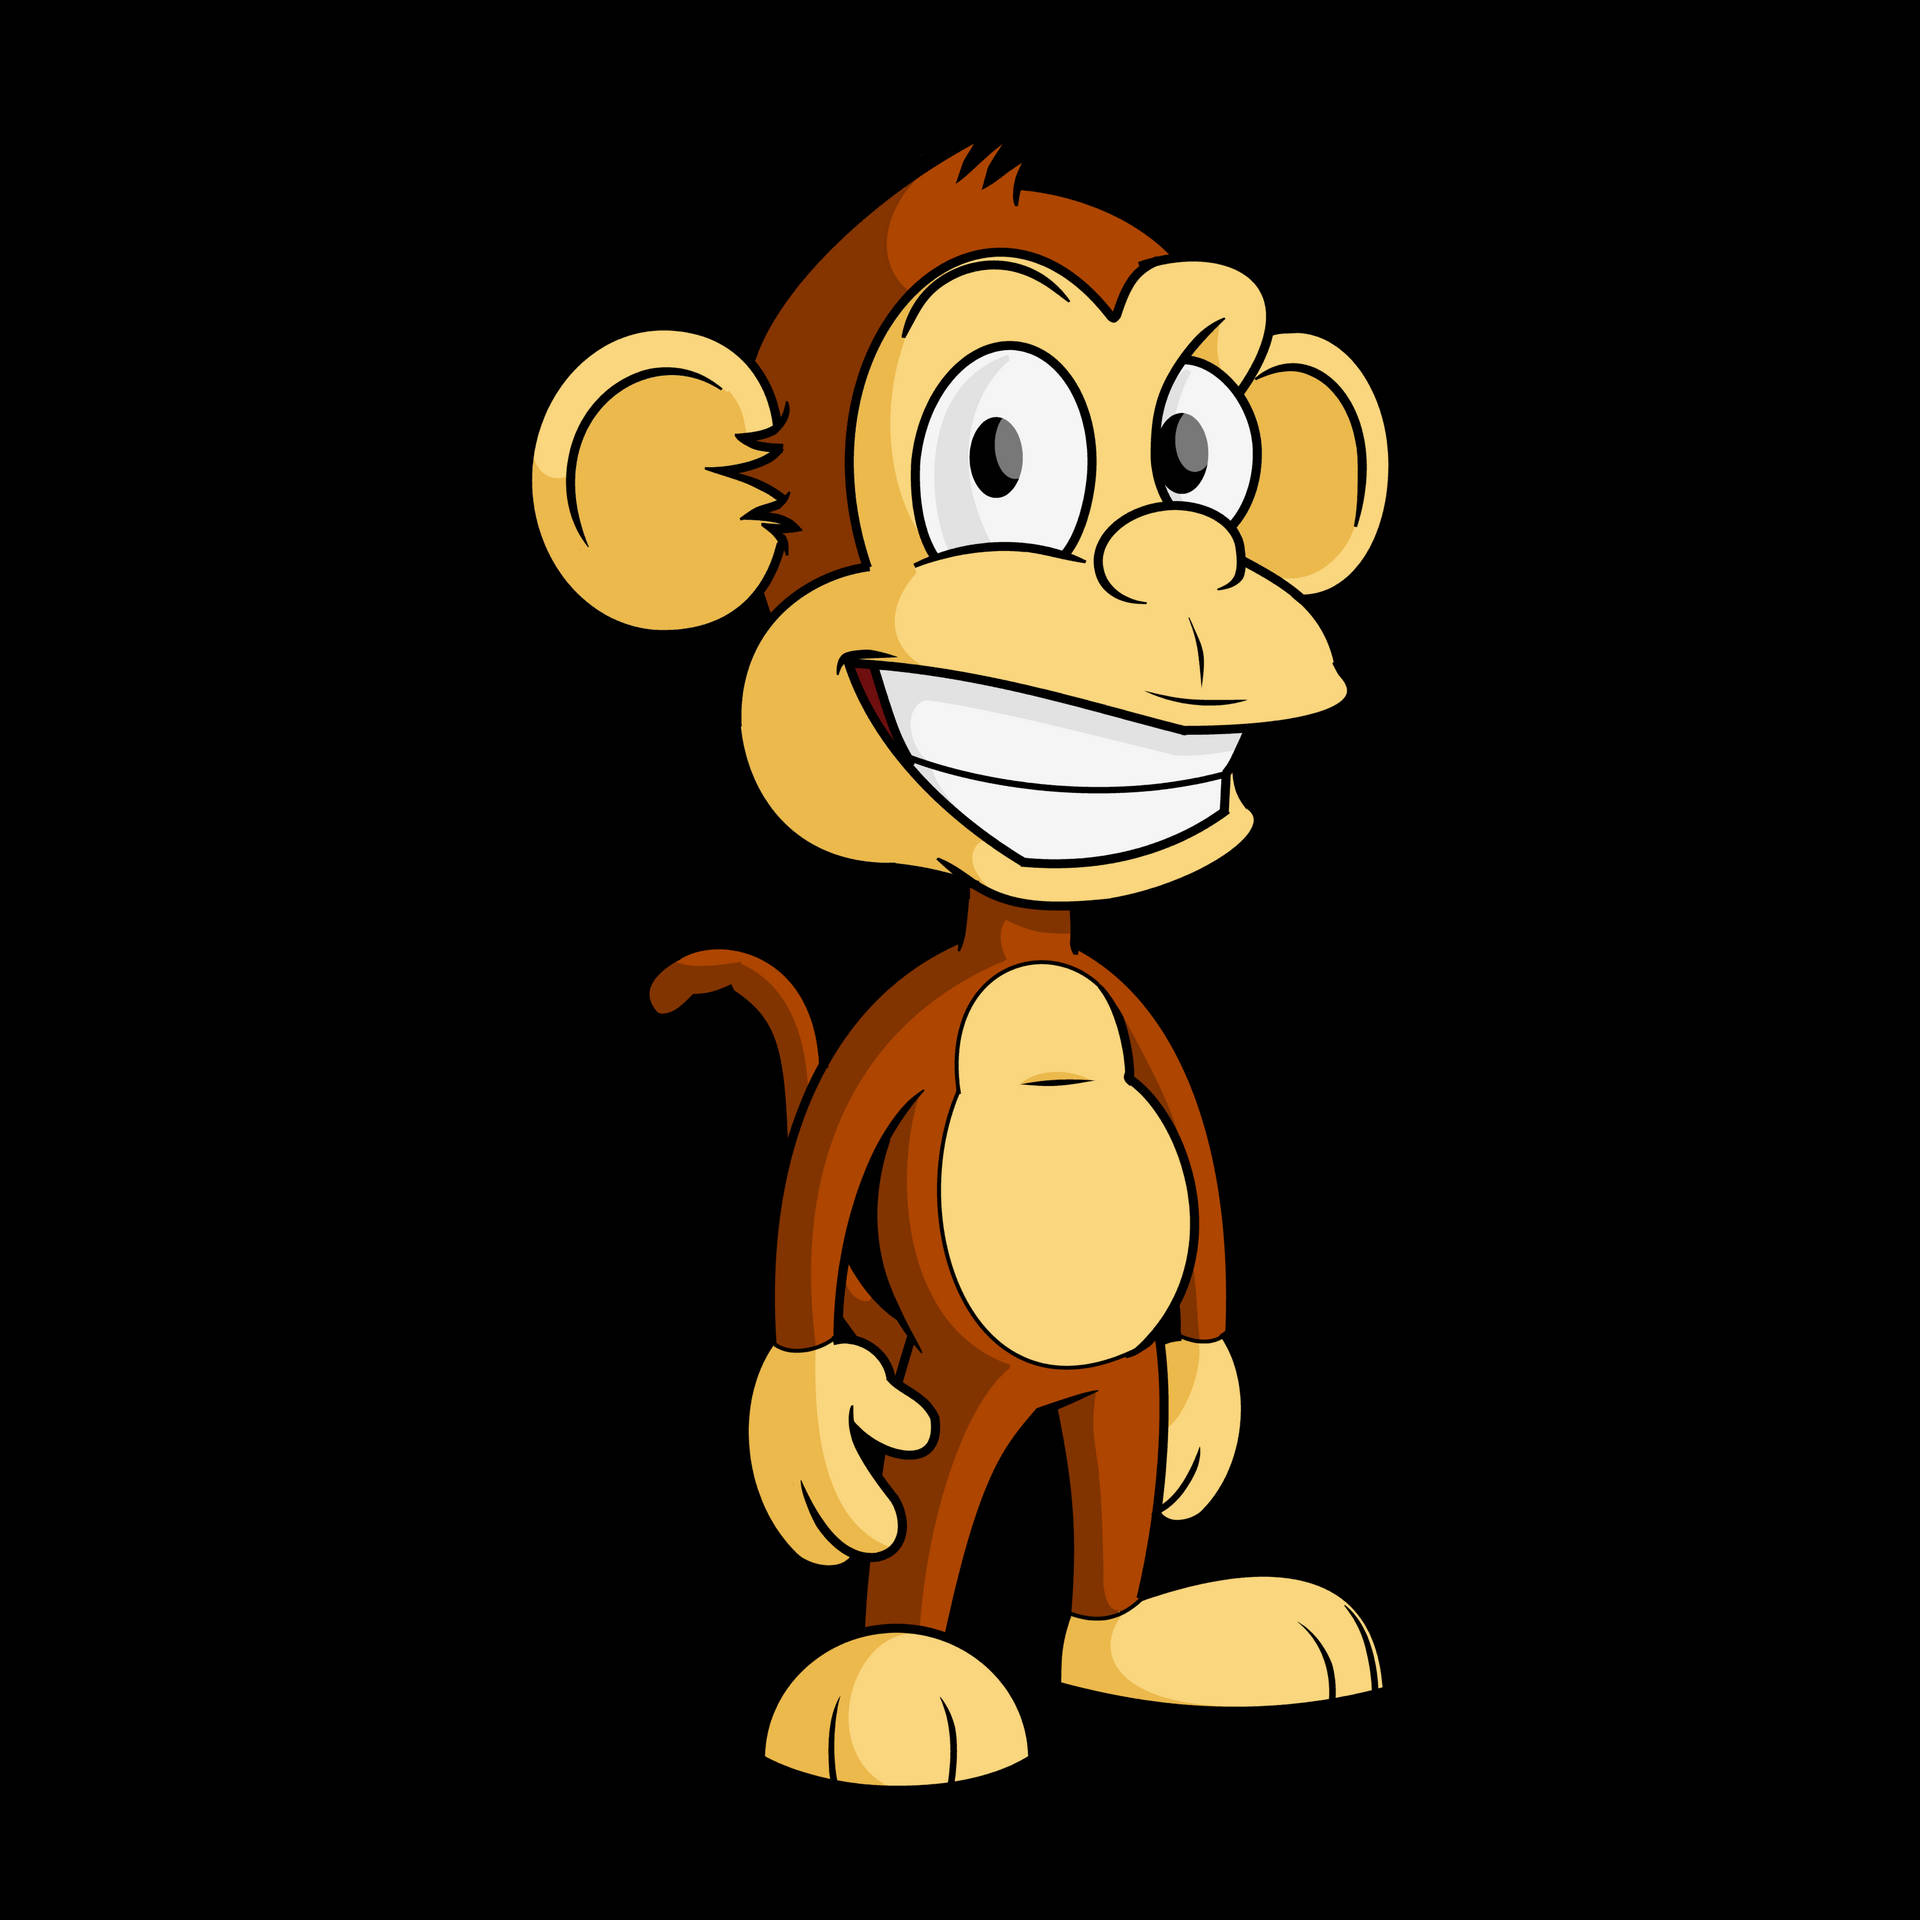 Cute Monkey Grinning Adorably Wallpaper